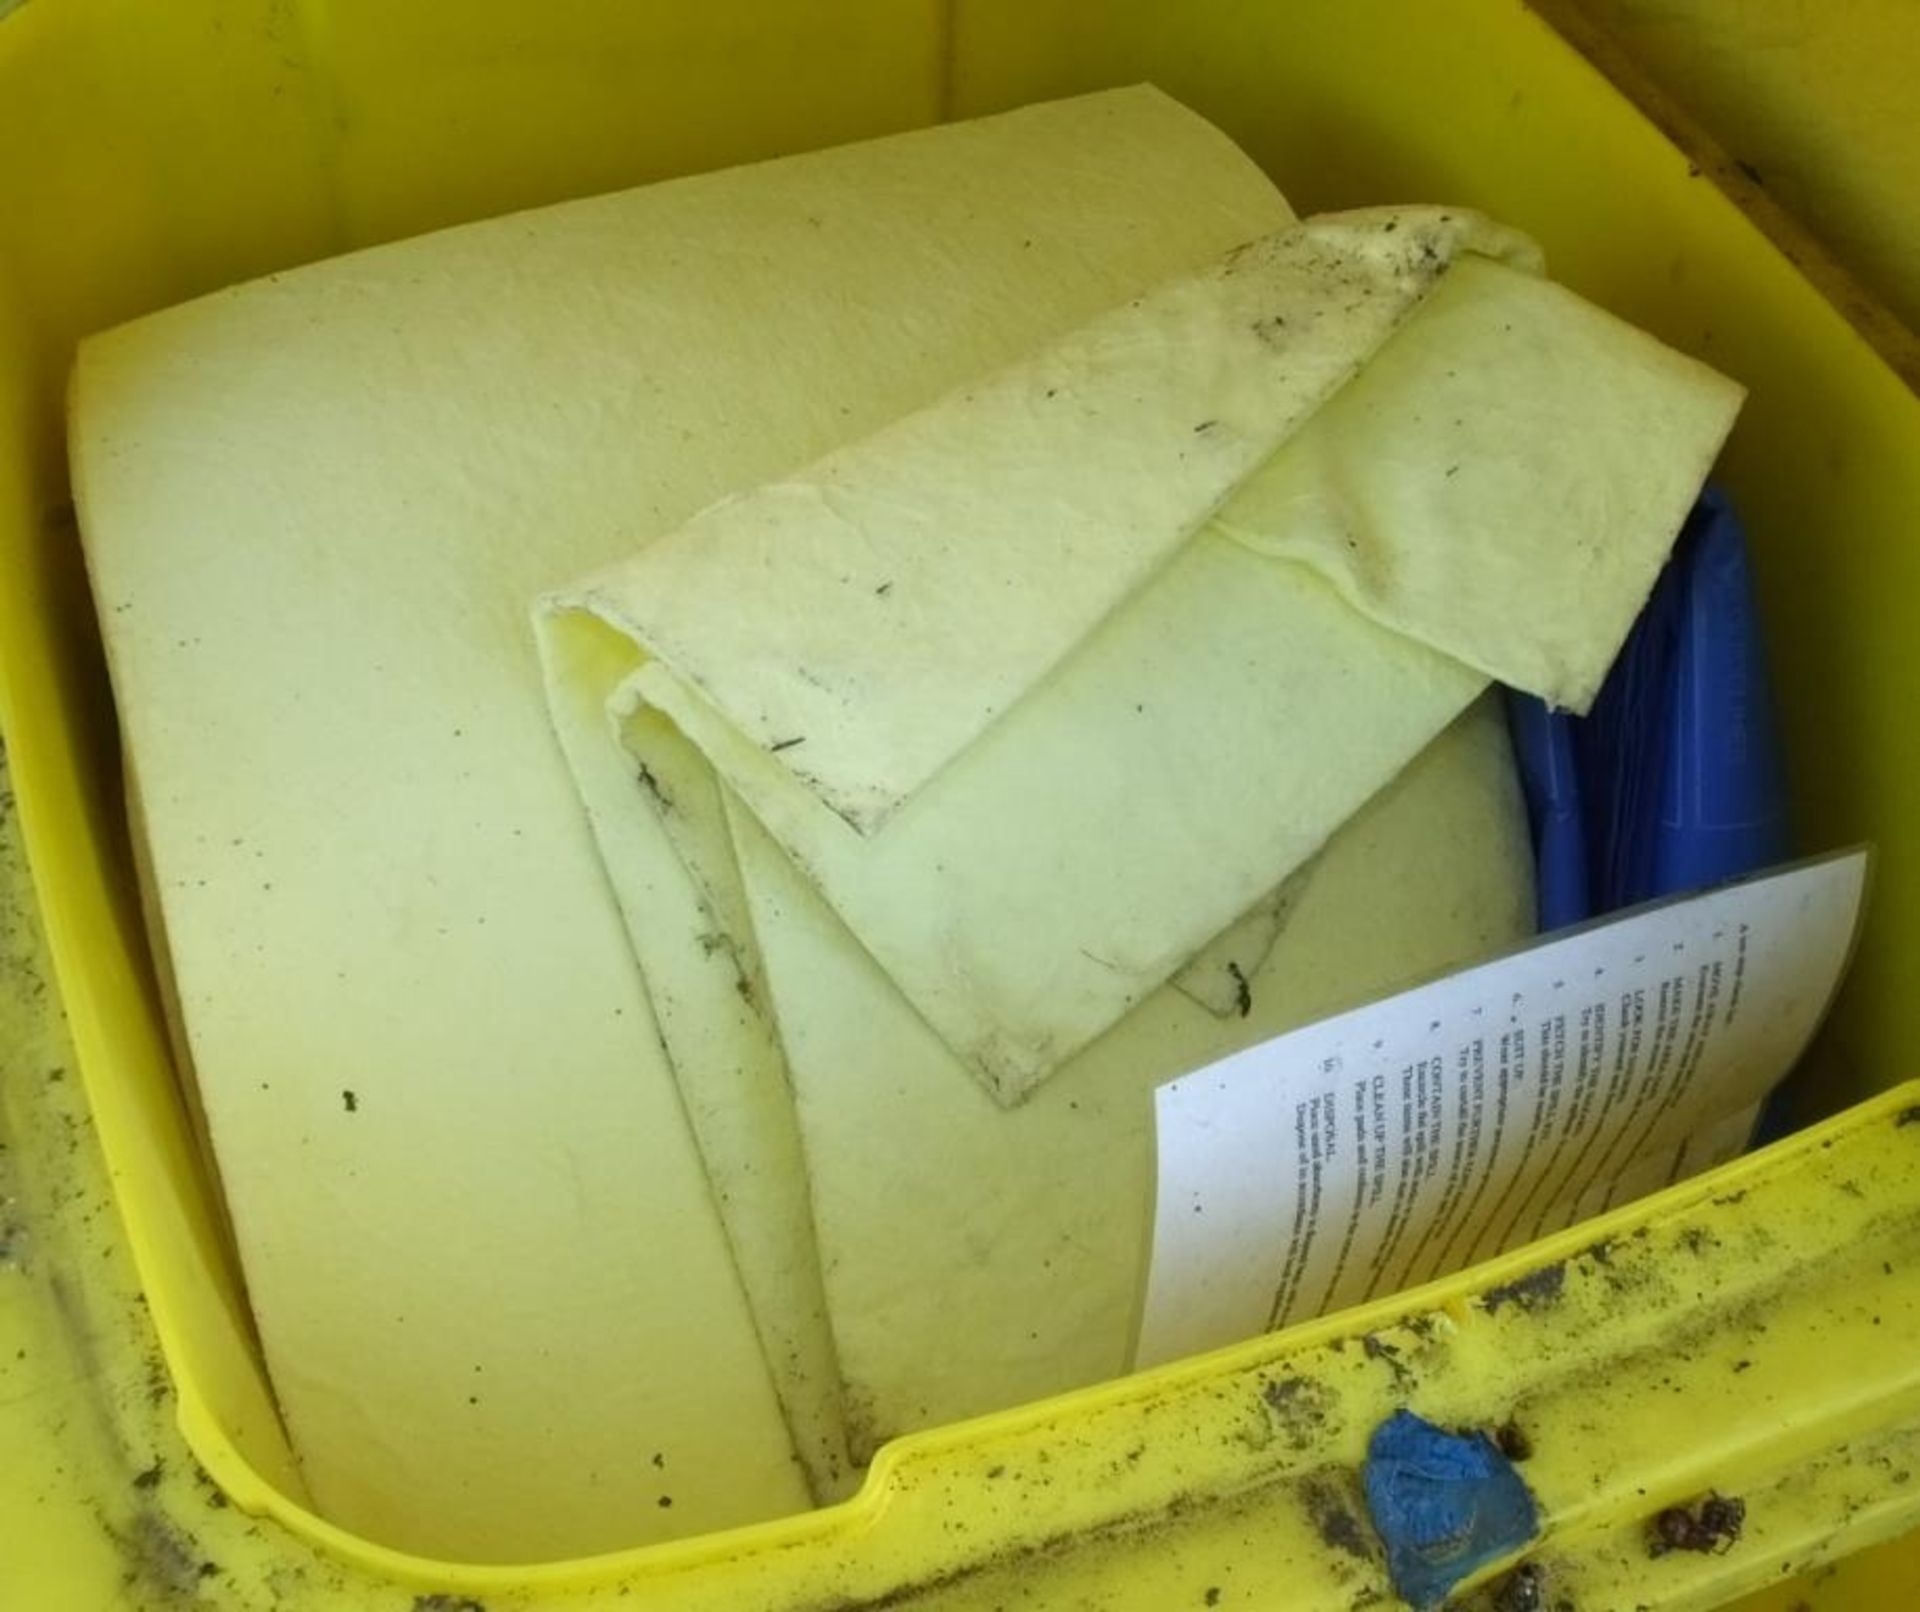 Chemical Spill Kit in Yellow Bin - Image 2 of 2